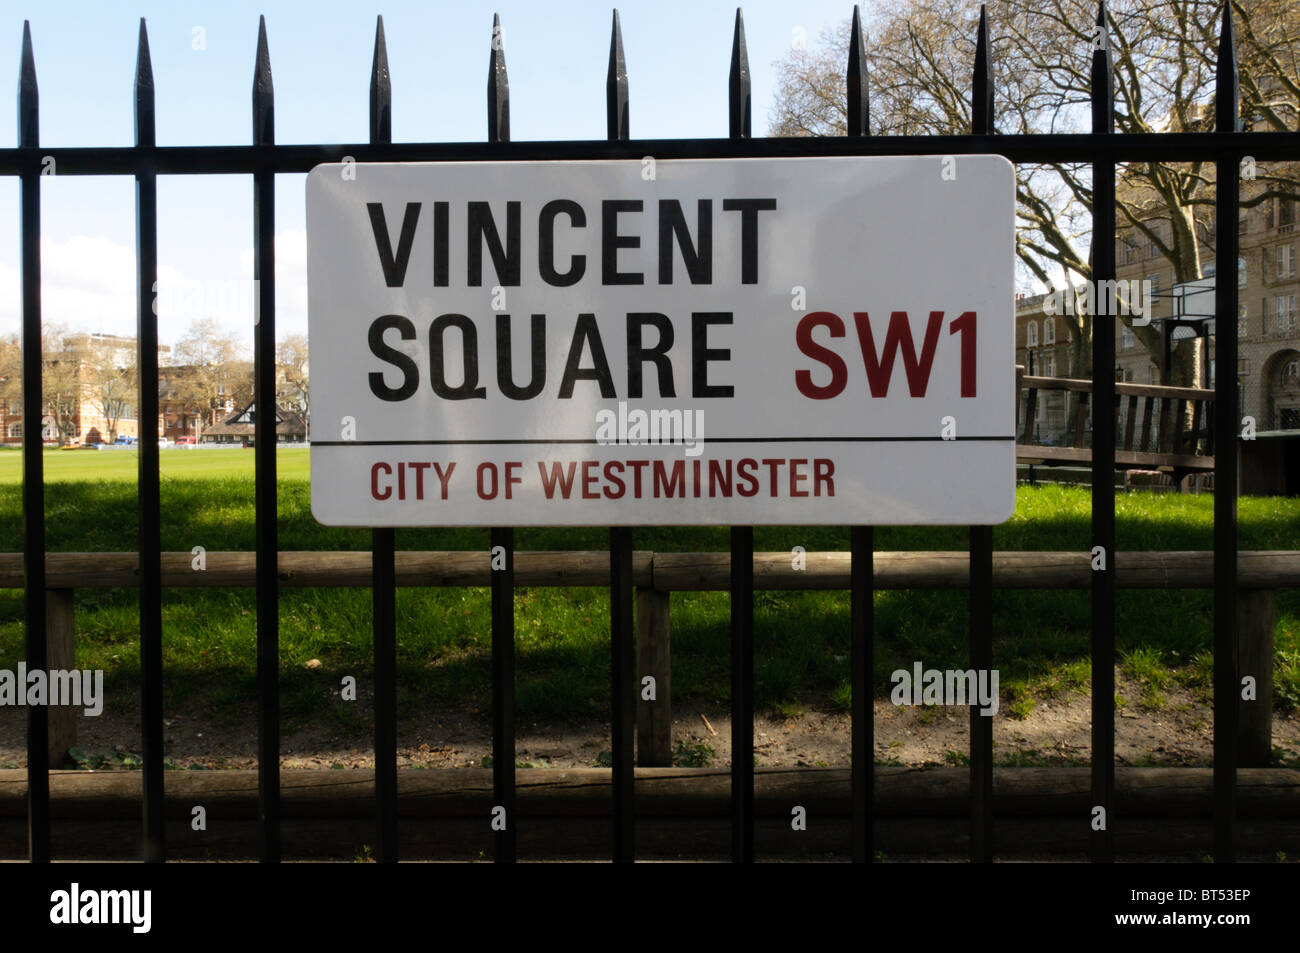 Street sign for Vincent Square, London SW1 Stock Photo